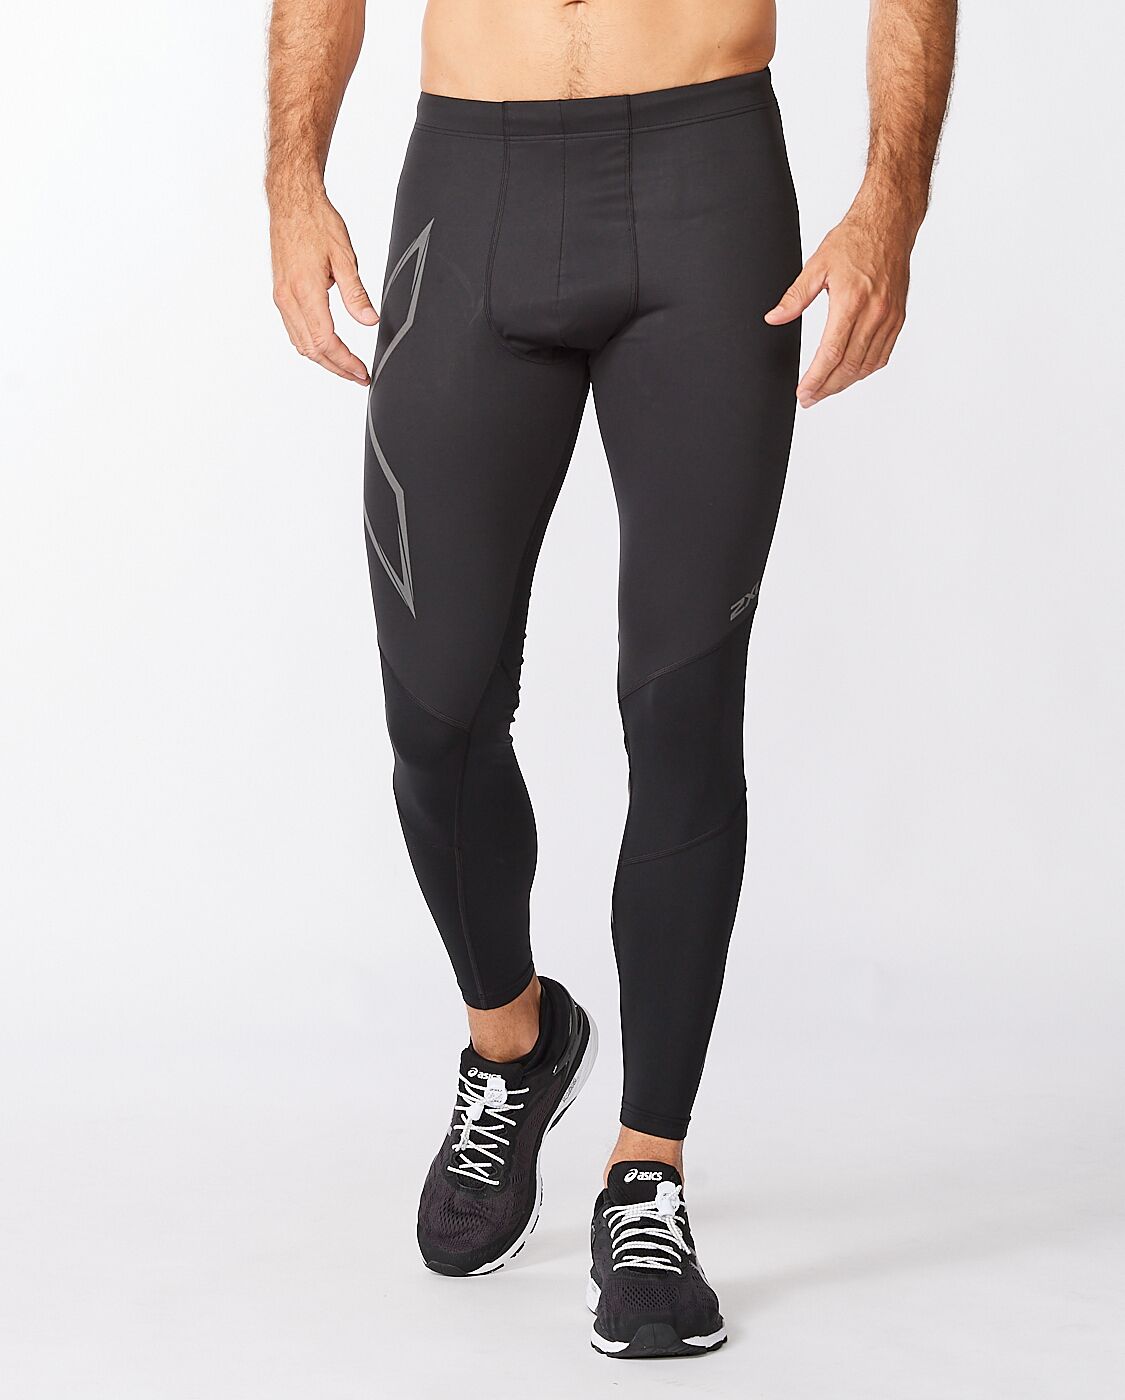 Mens Compression Tights & Leggings | Running & Recovery – 2XU